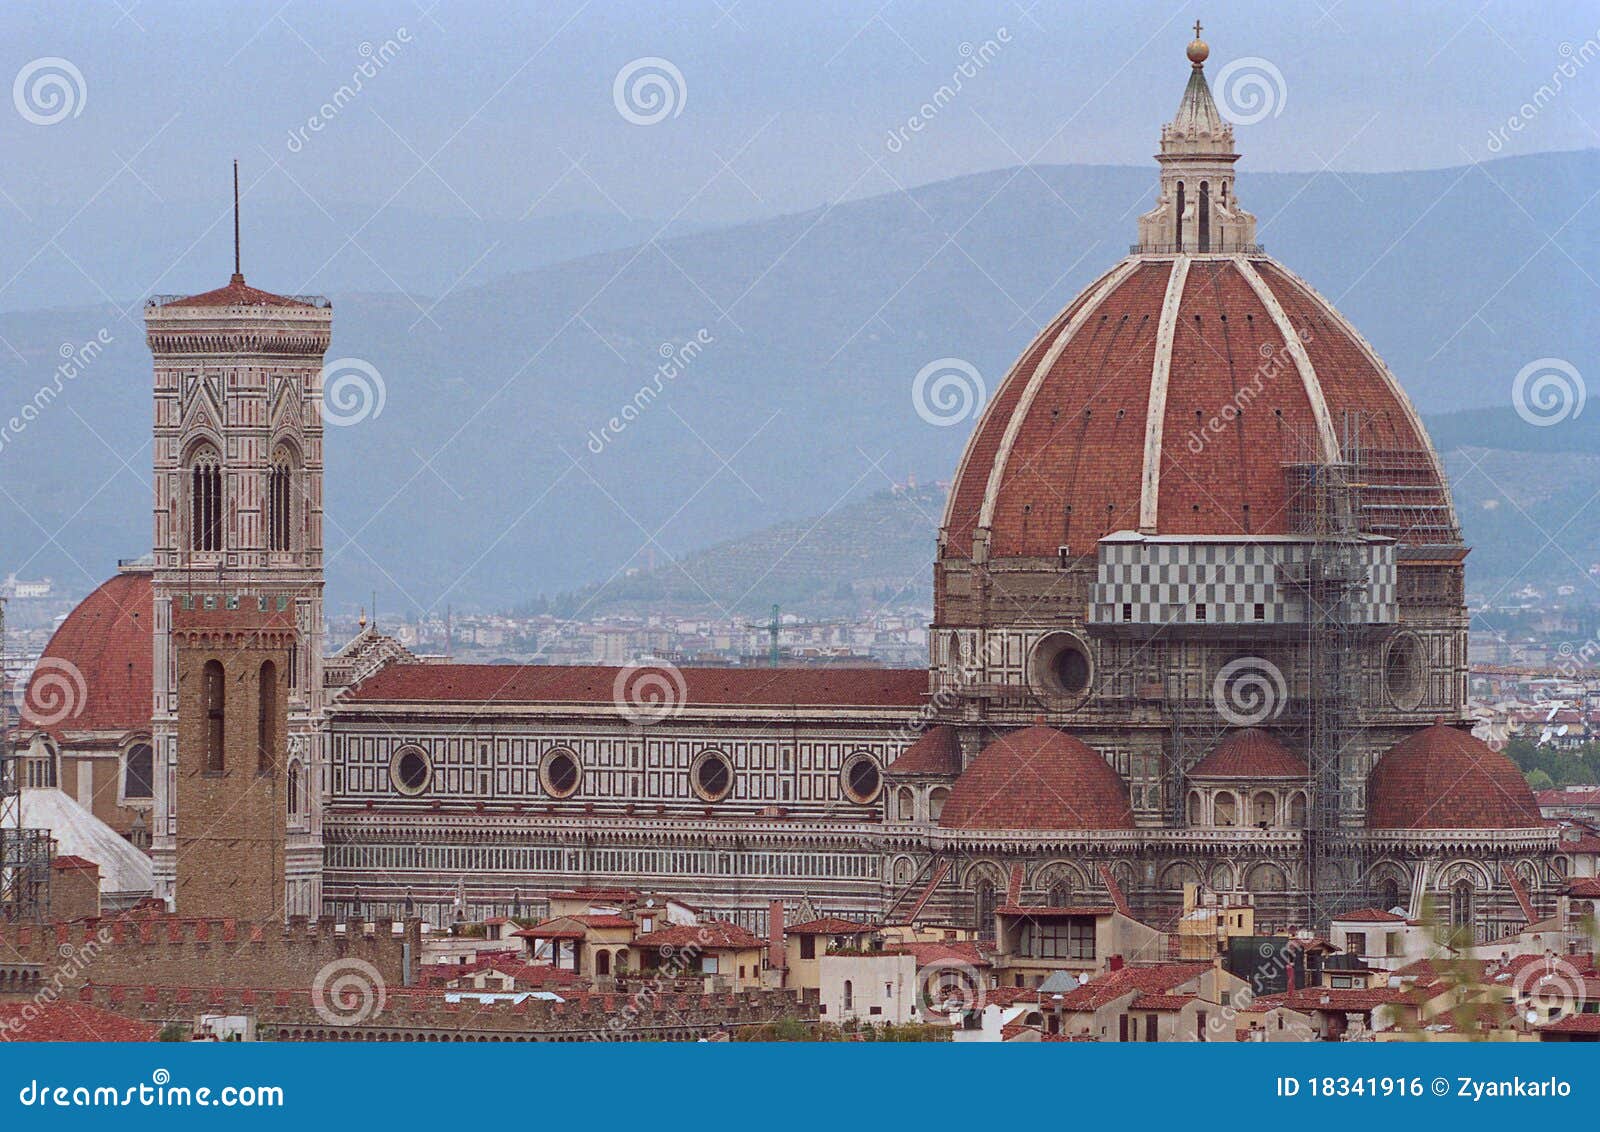 the ancient town firenze in italy